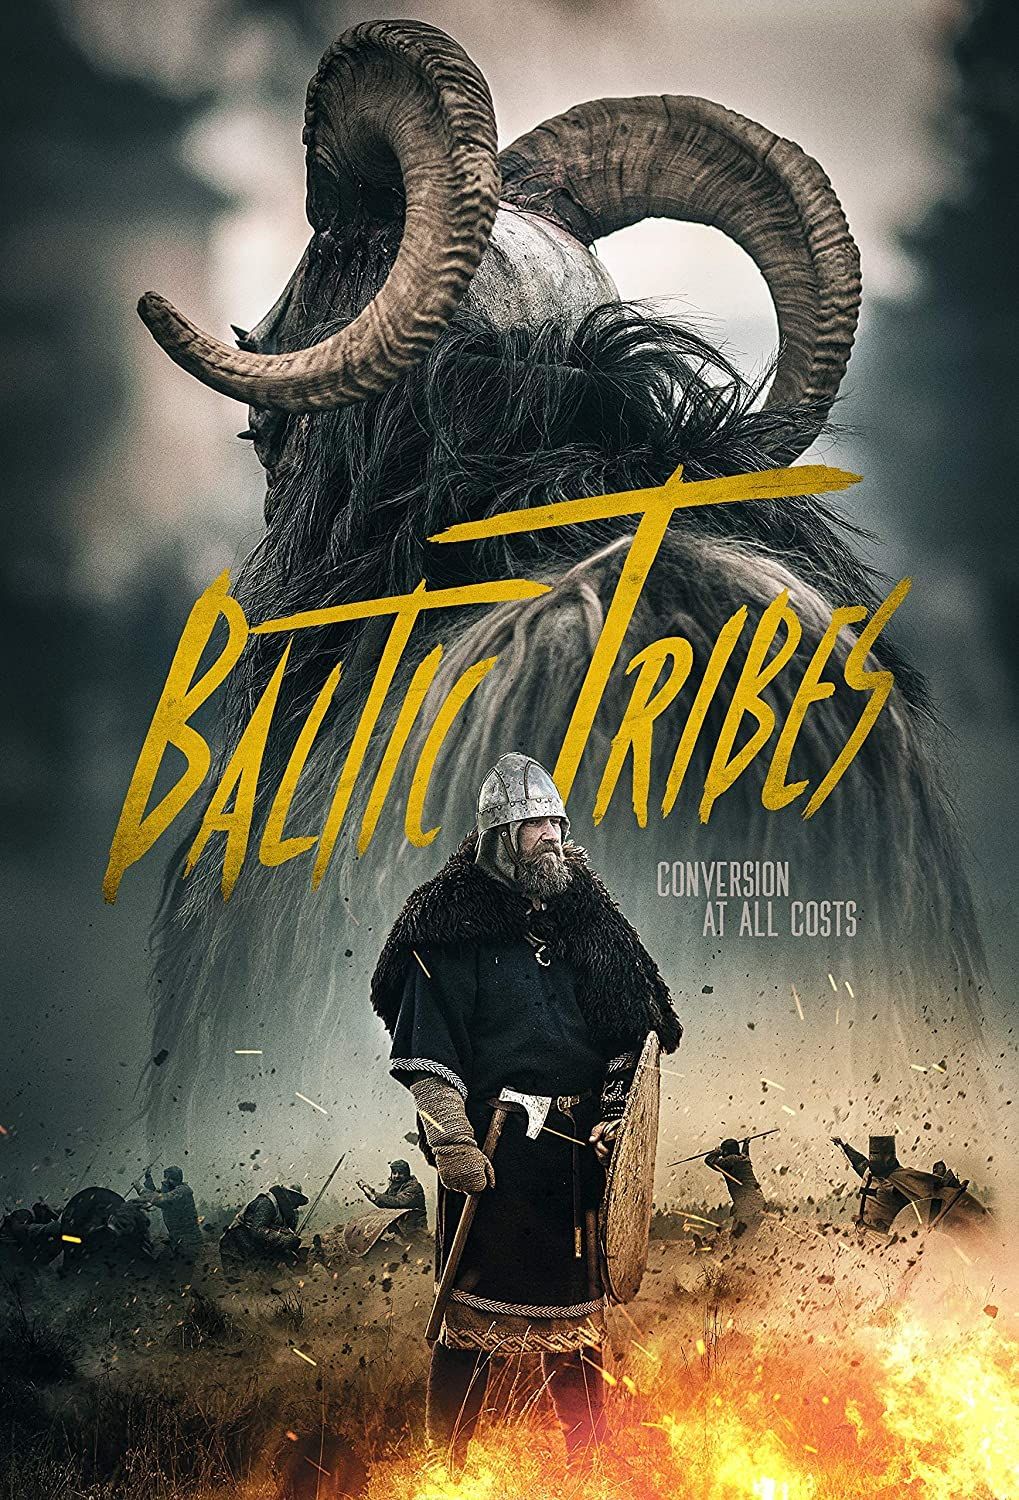 Baltic Tribes (2018) Hindi Dubbed HDRip download full movie